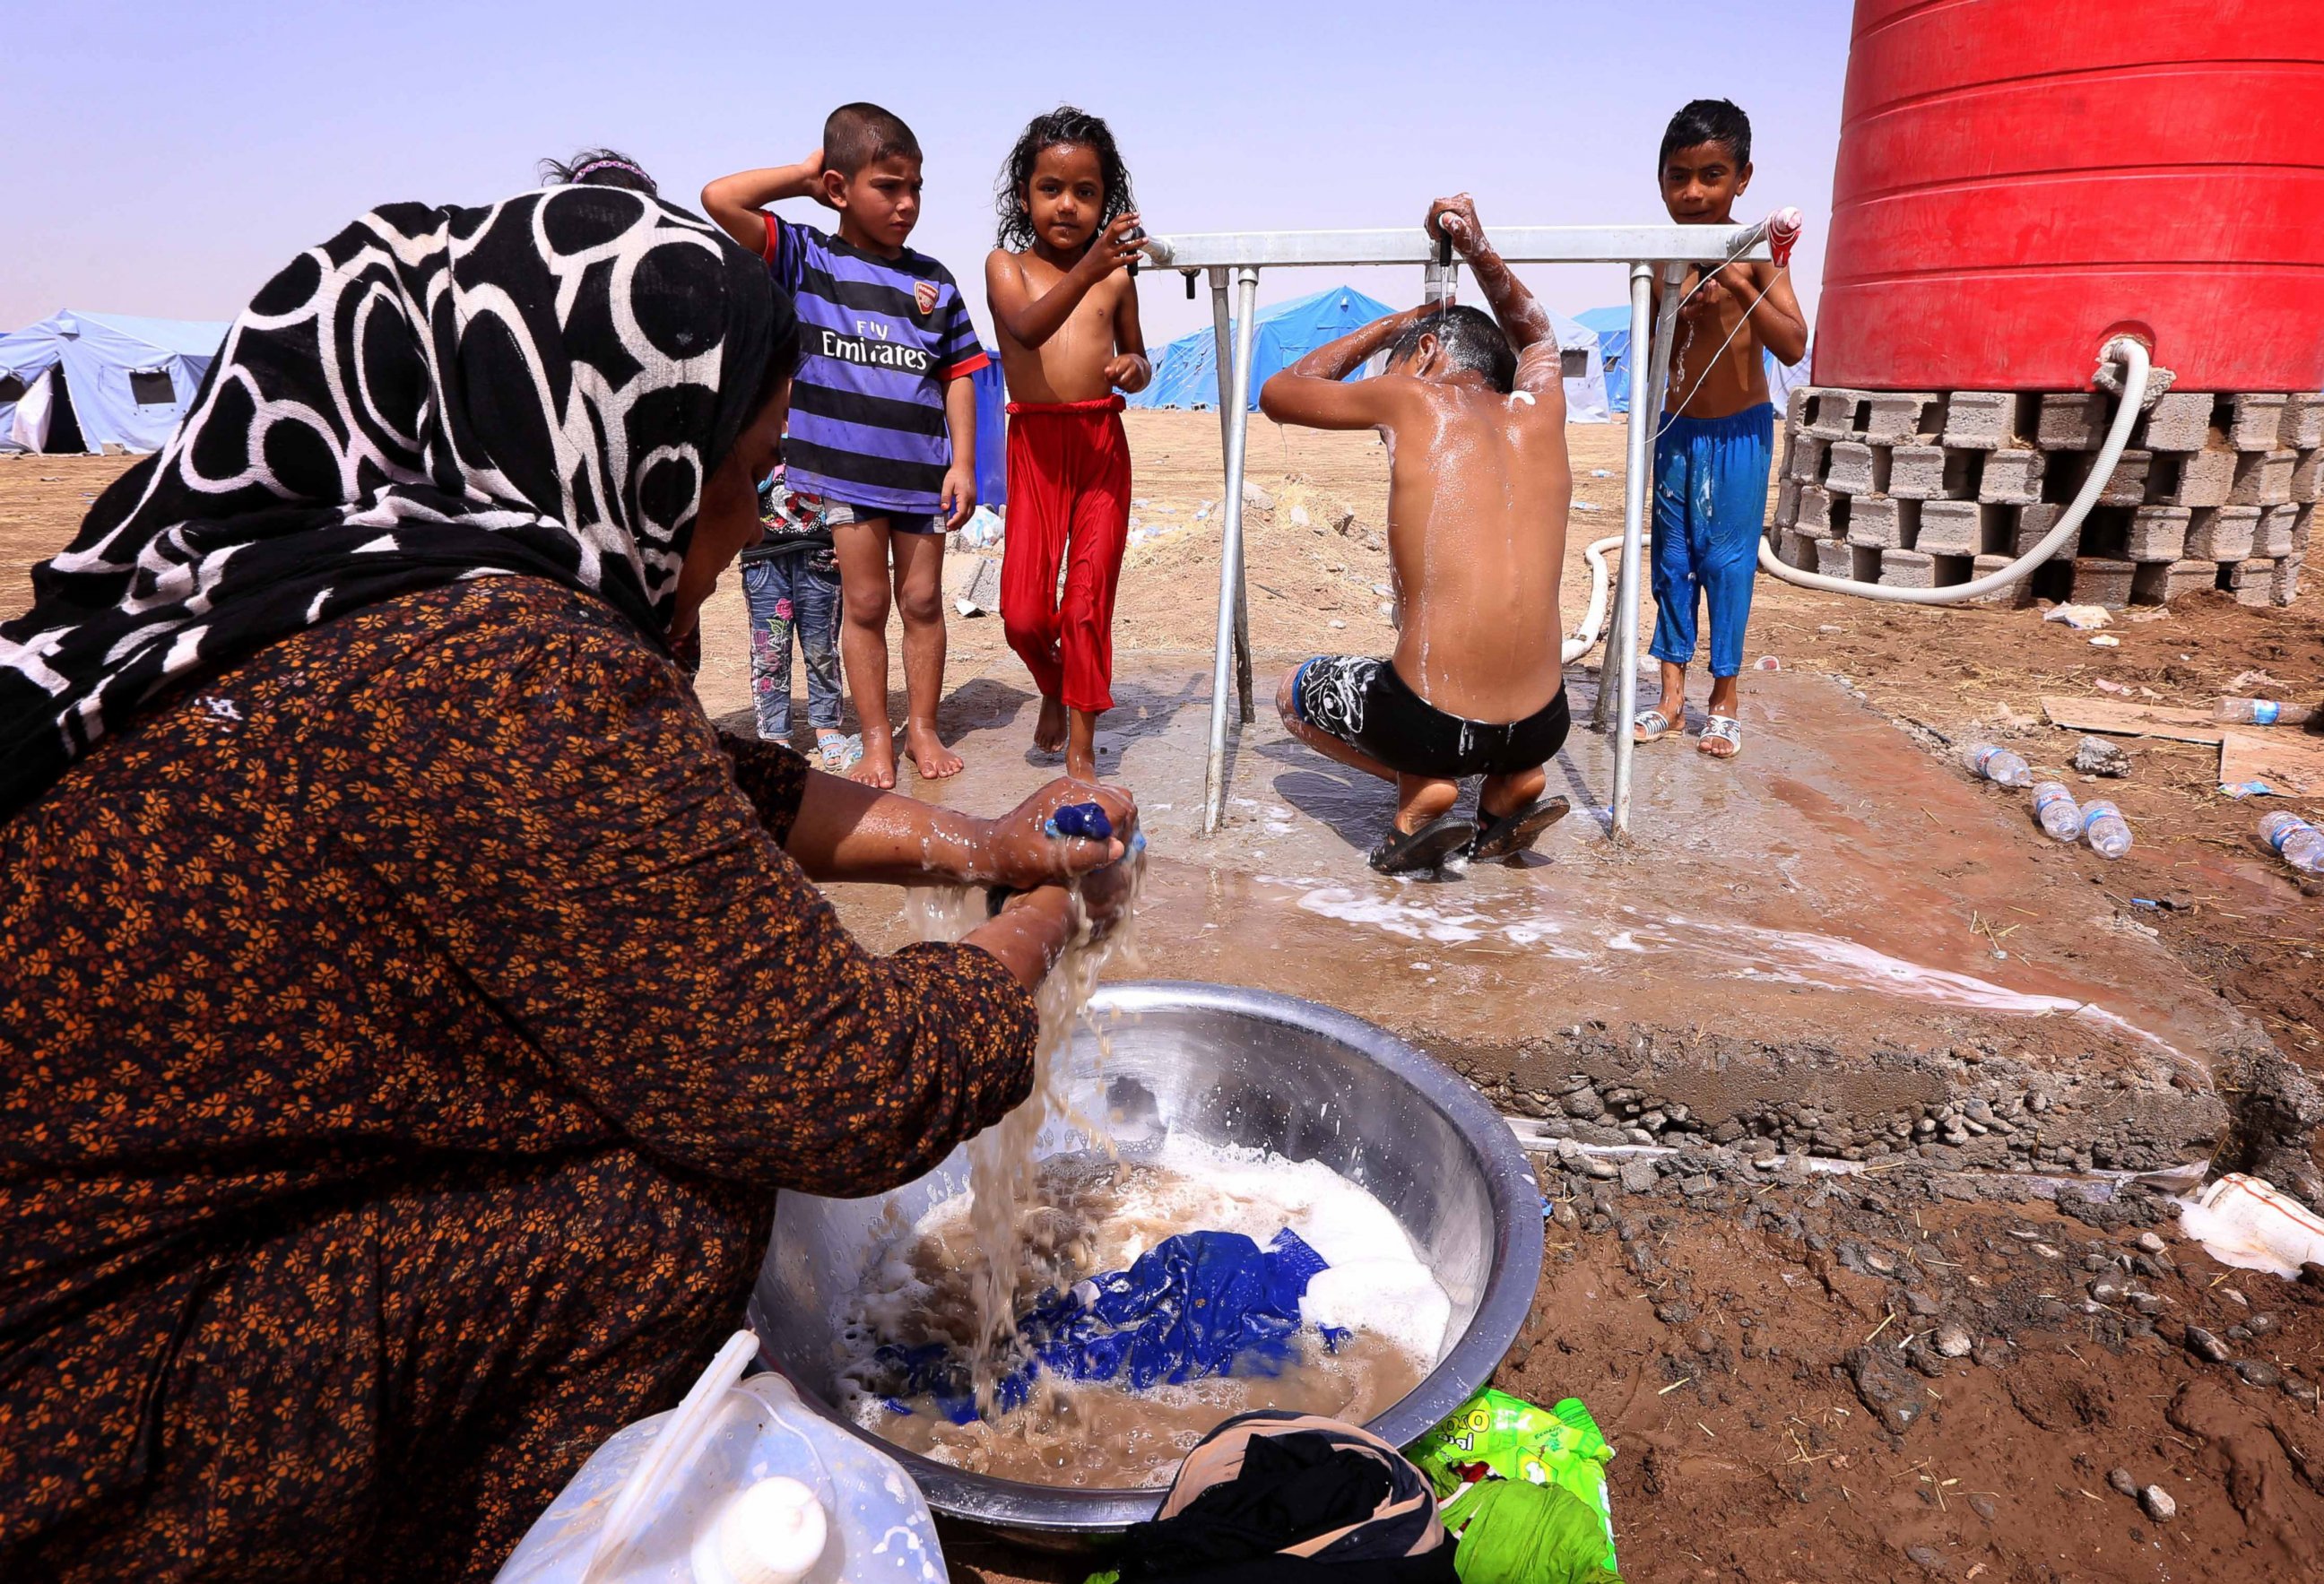 PHOTO: A displaced Iraqi woman washes her family's laundry as children shower outside their tent at a temporary camp set up to shelter civilians fleeing violence in Iraq's northern Nineveh province on June 13, 2014.